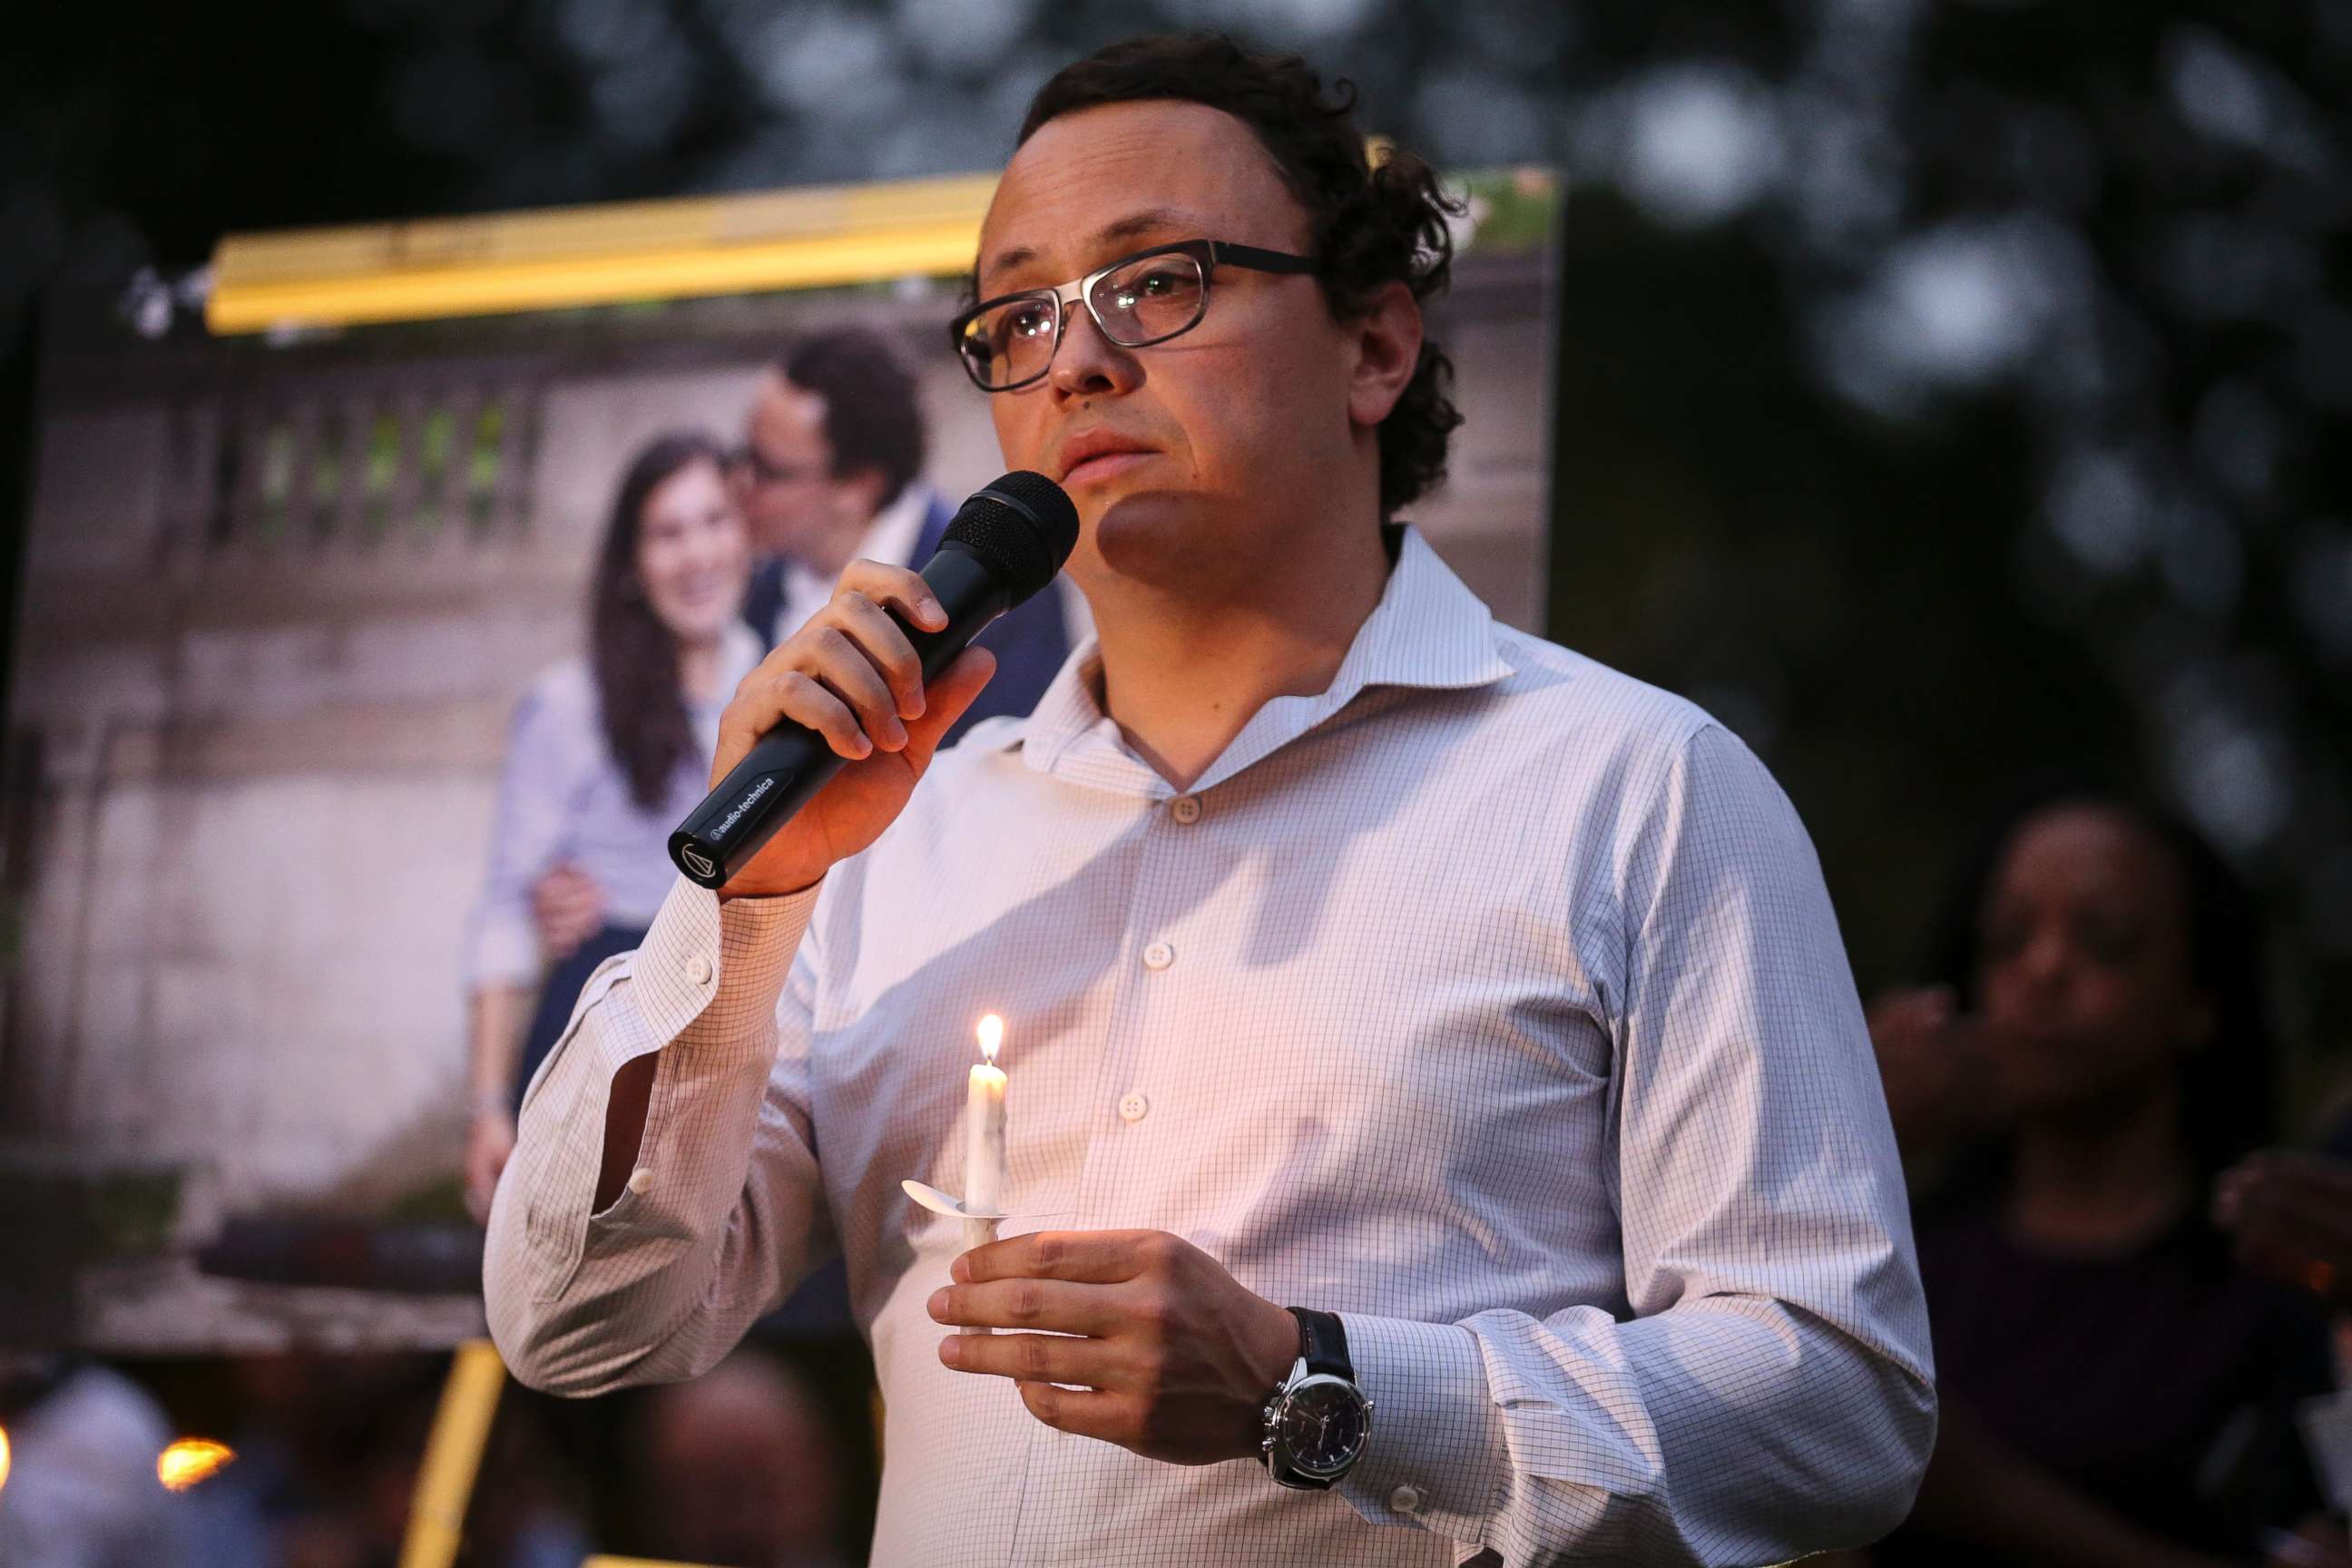 PHOTO: Daniel Hincapie, fiance of Wendy Martinez, speaks during a candlelight vigil in her honor in Washington, D.C. on Sept. 20, 2018.